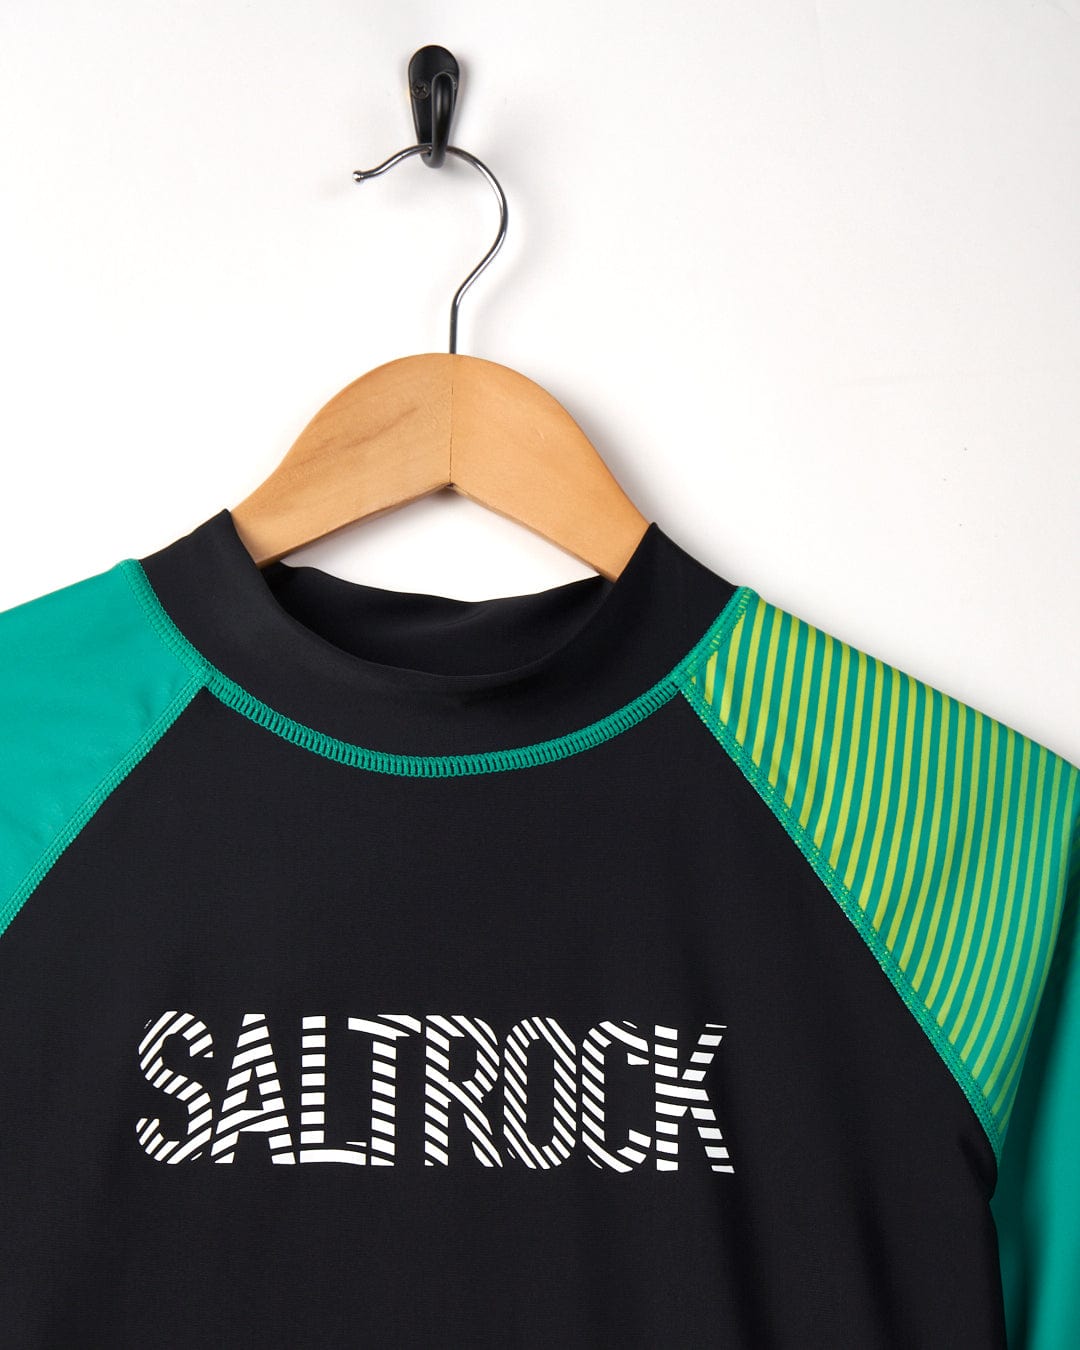 A black and green Saltrock DNA Wave - Recycled Mens Short Sleeve Rashvest hung on a wooden hanger against a white background.